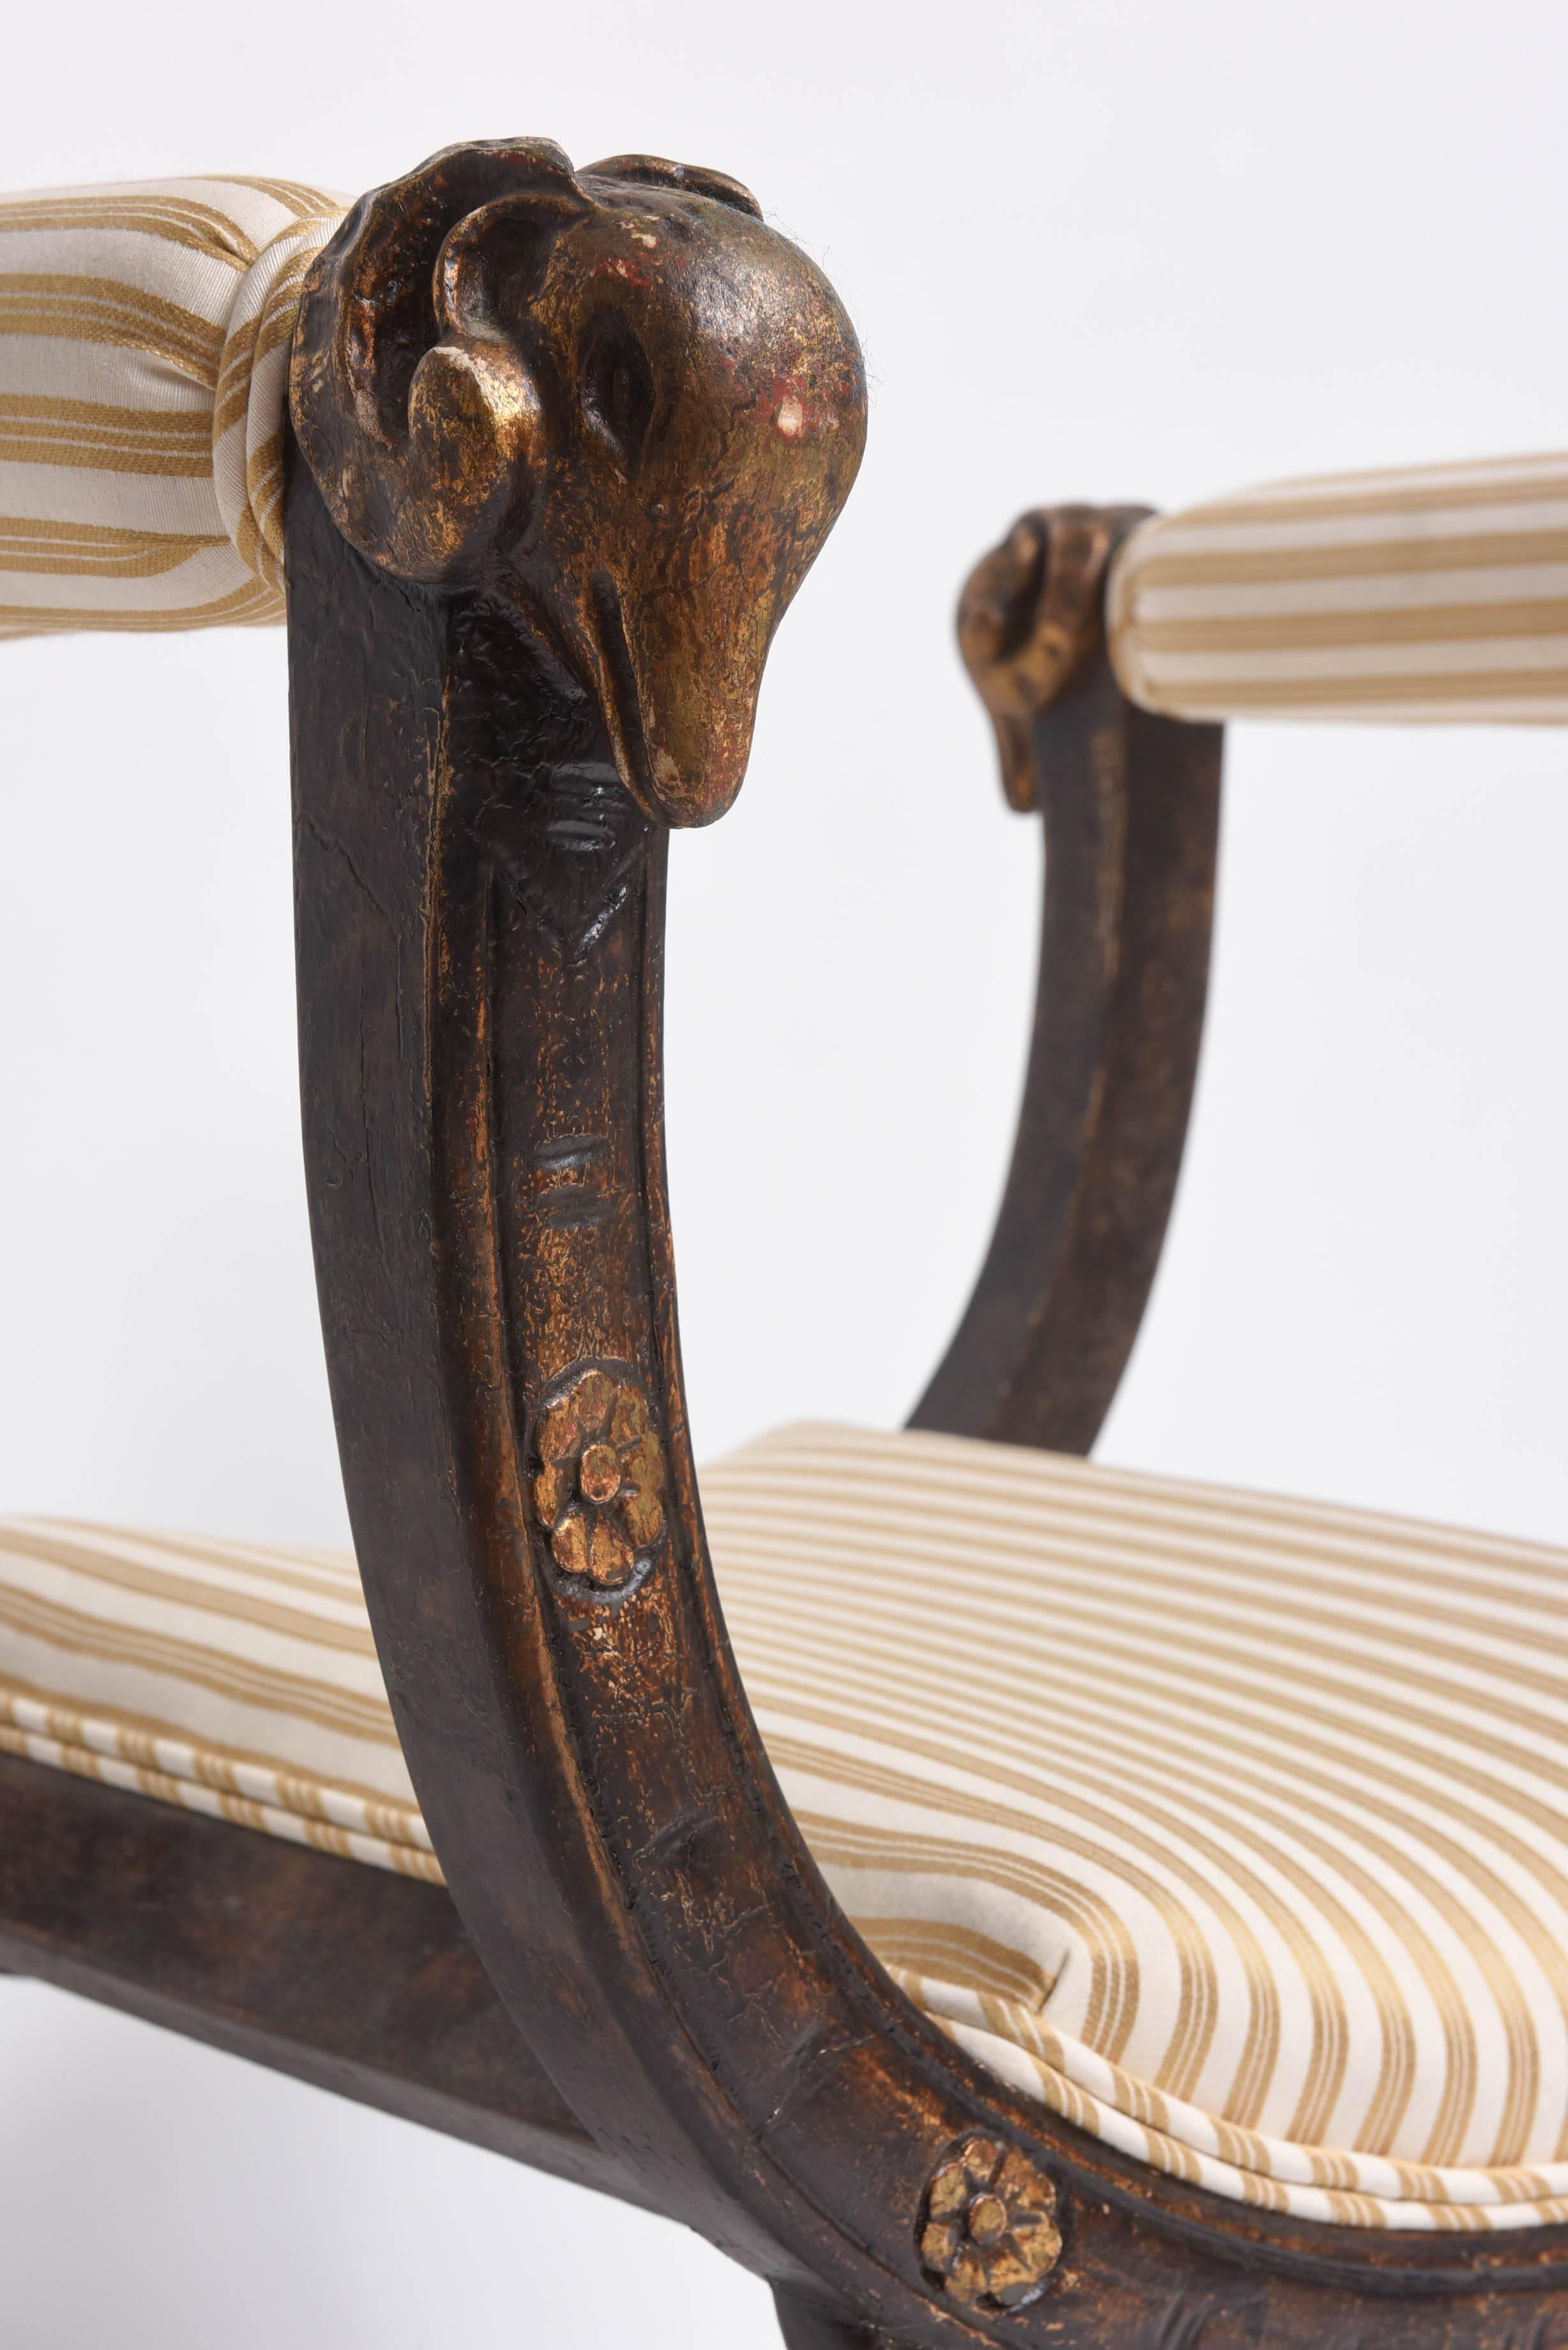 Italian 19th Century Neoclassical Curule Bench with Goat-Head and Hooves